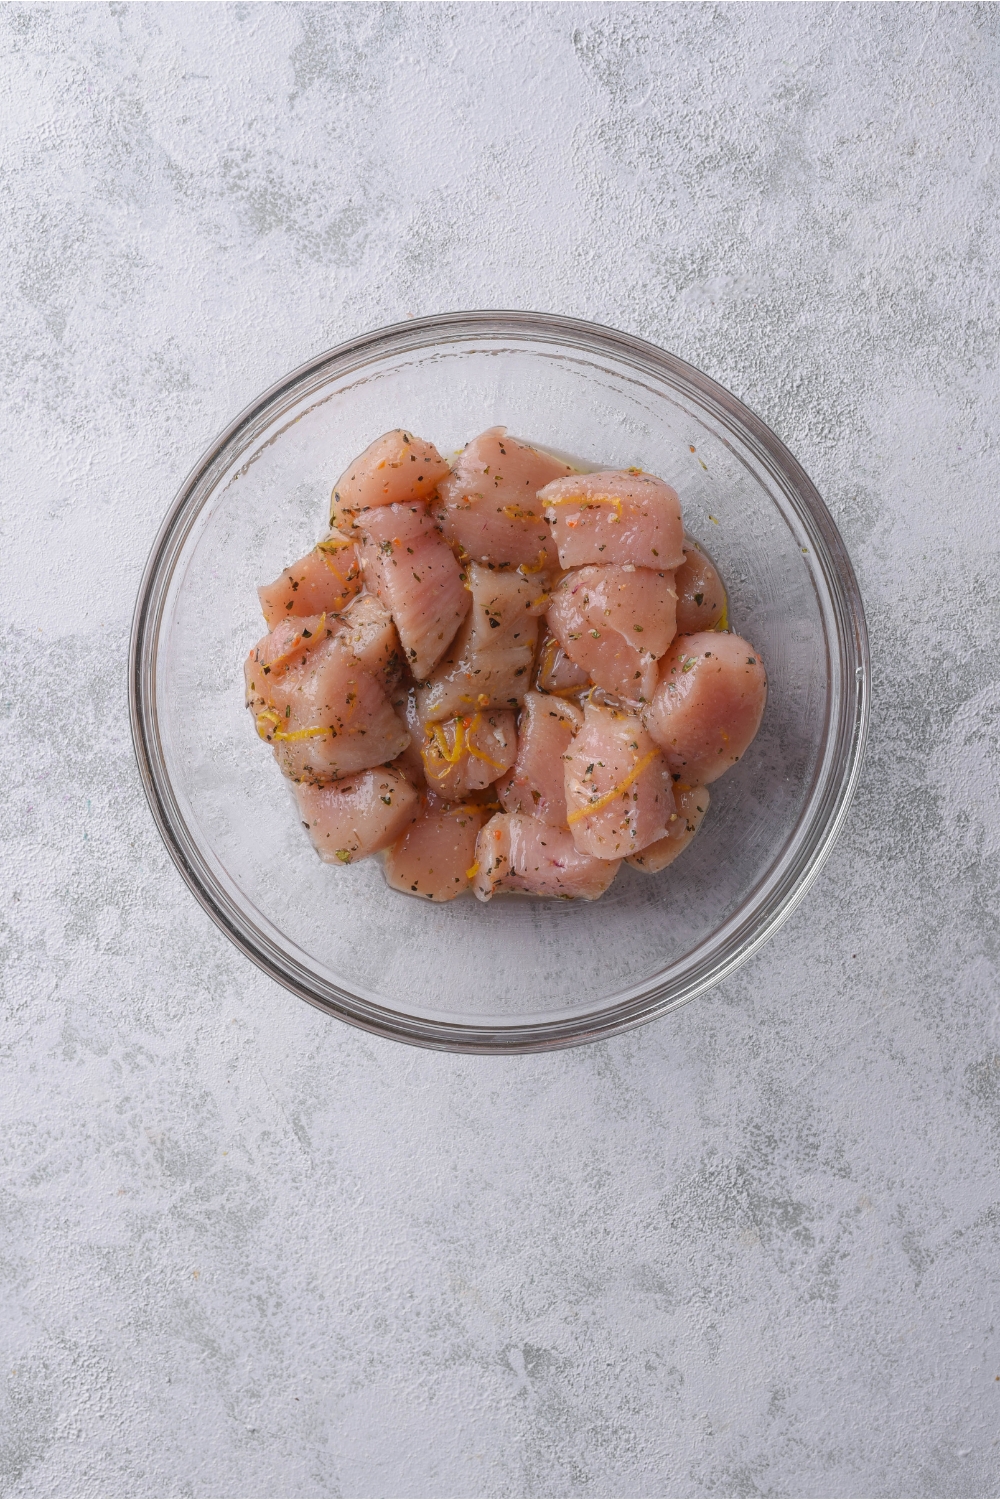 A bowl of raw marinating chicken cut into bite-sized pieces.